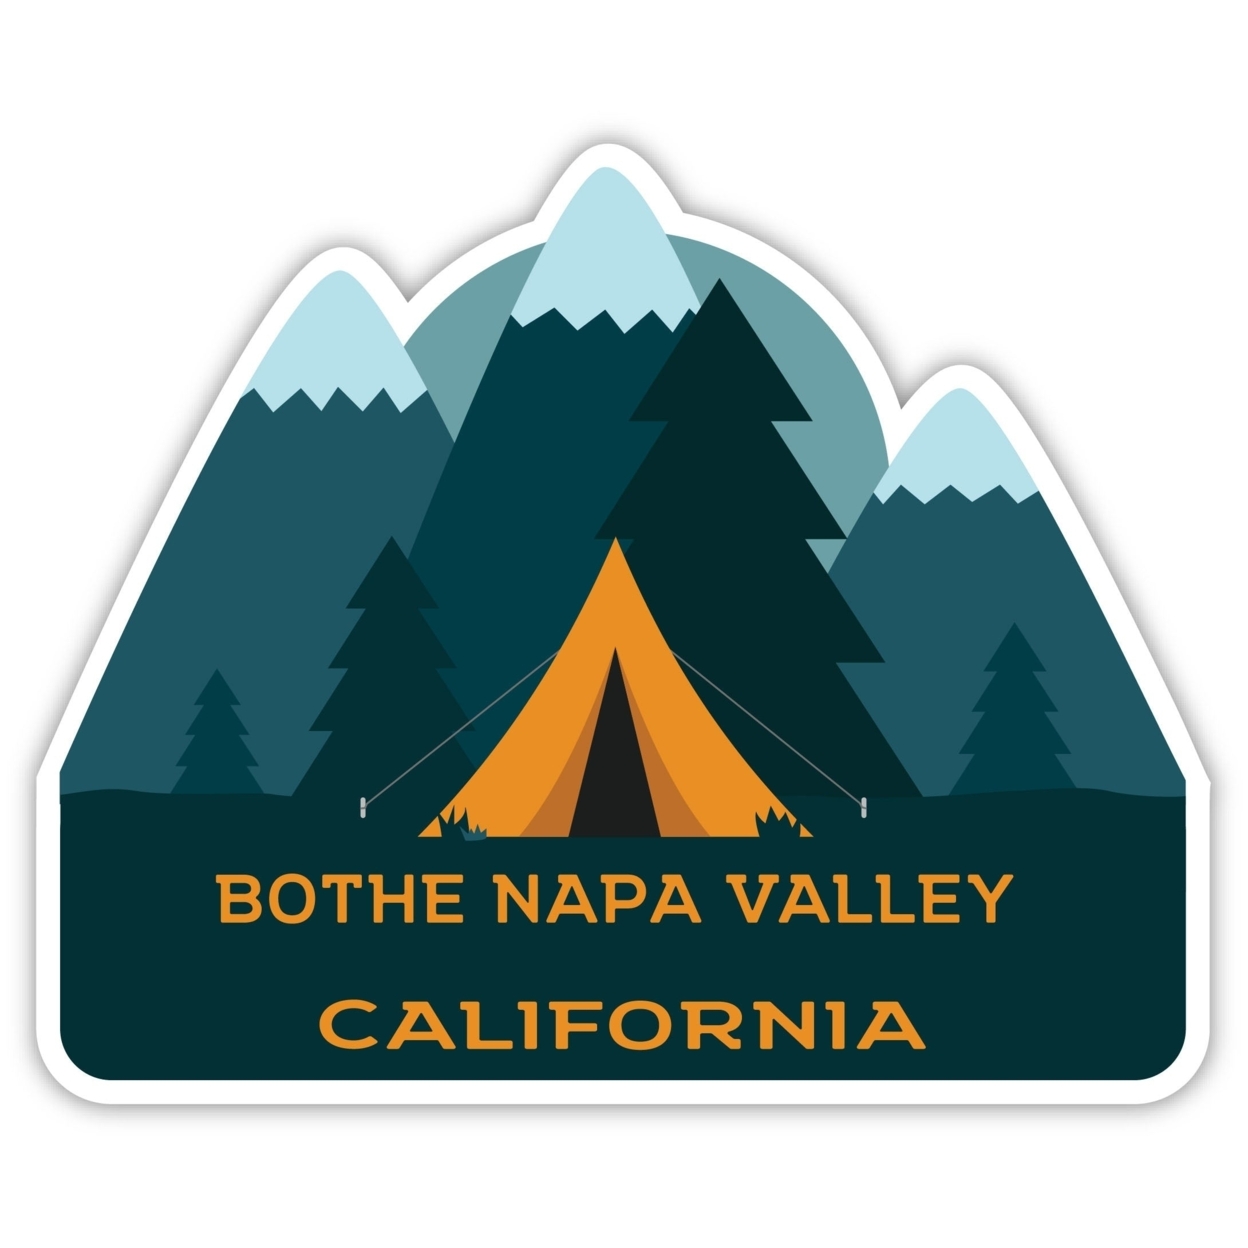 Bothe Napa Valley California Souvenir Decorative Stickers (Choose Theme And Size) - 4-Pack, 12-Inch, Tent